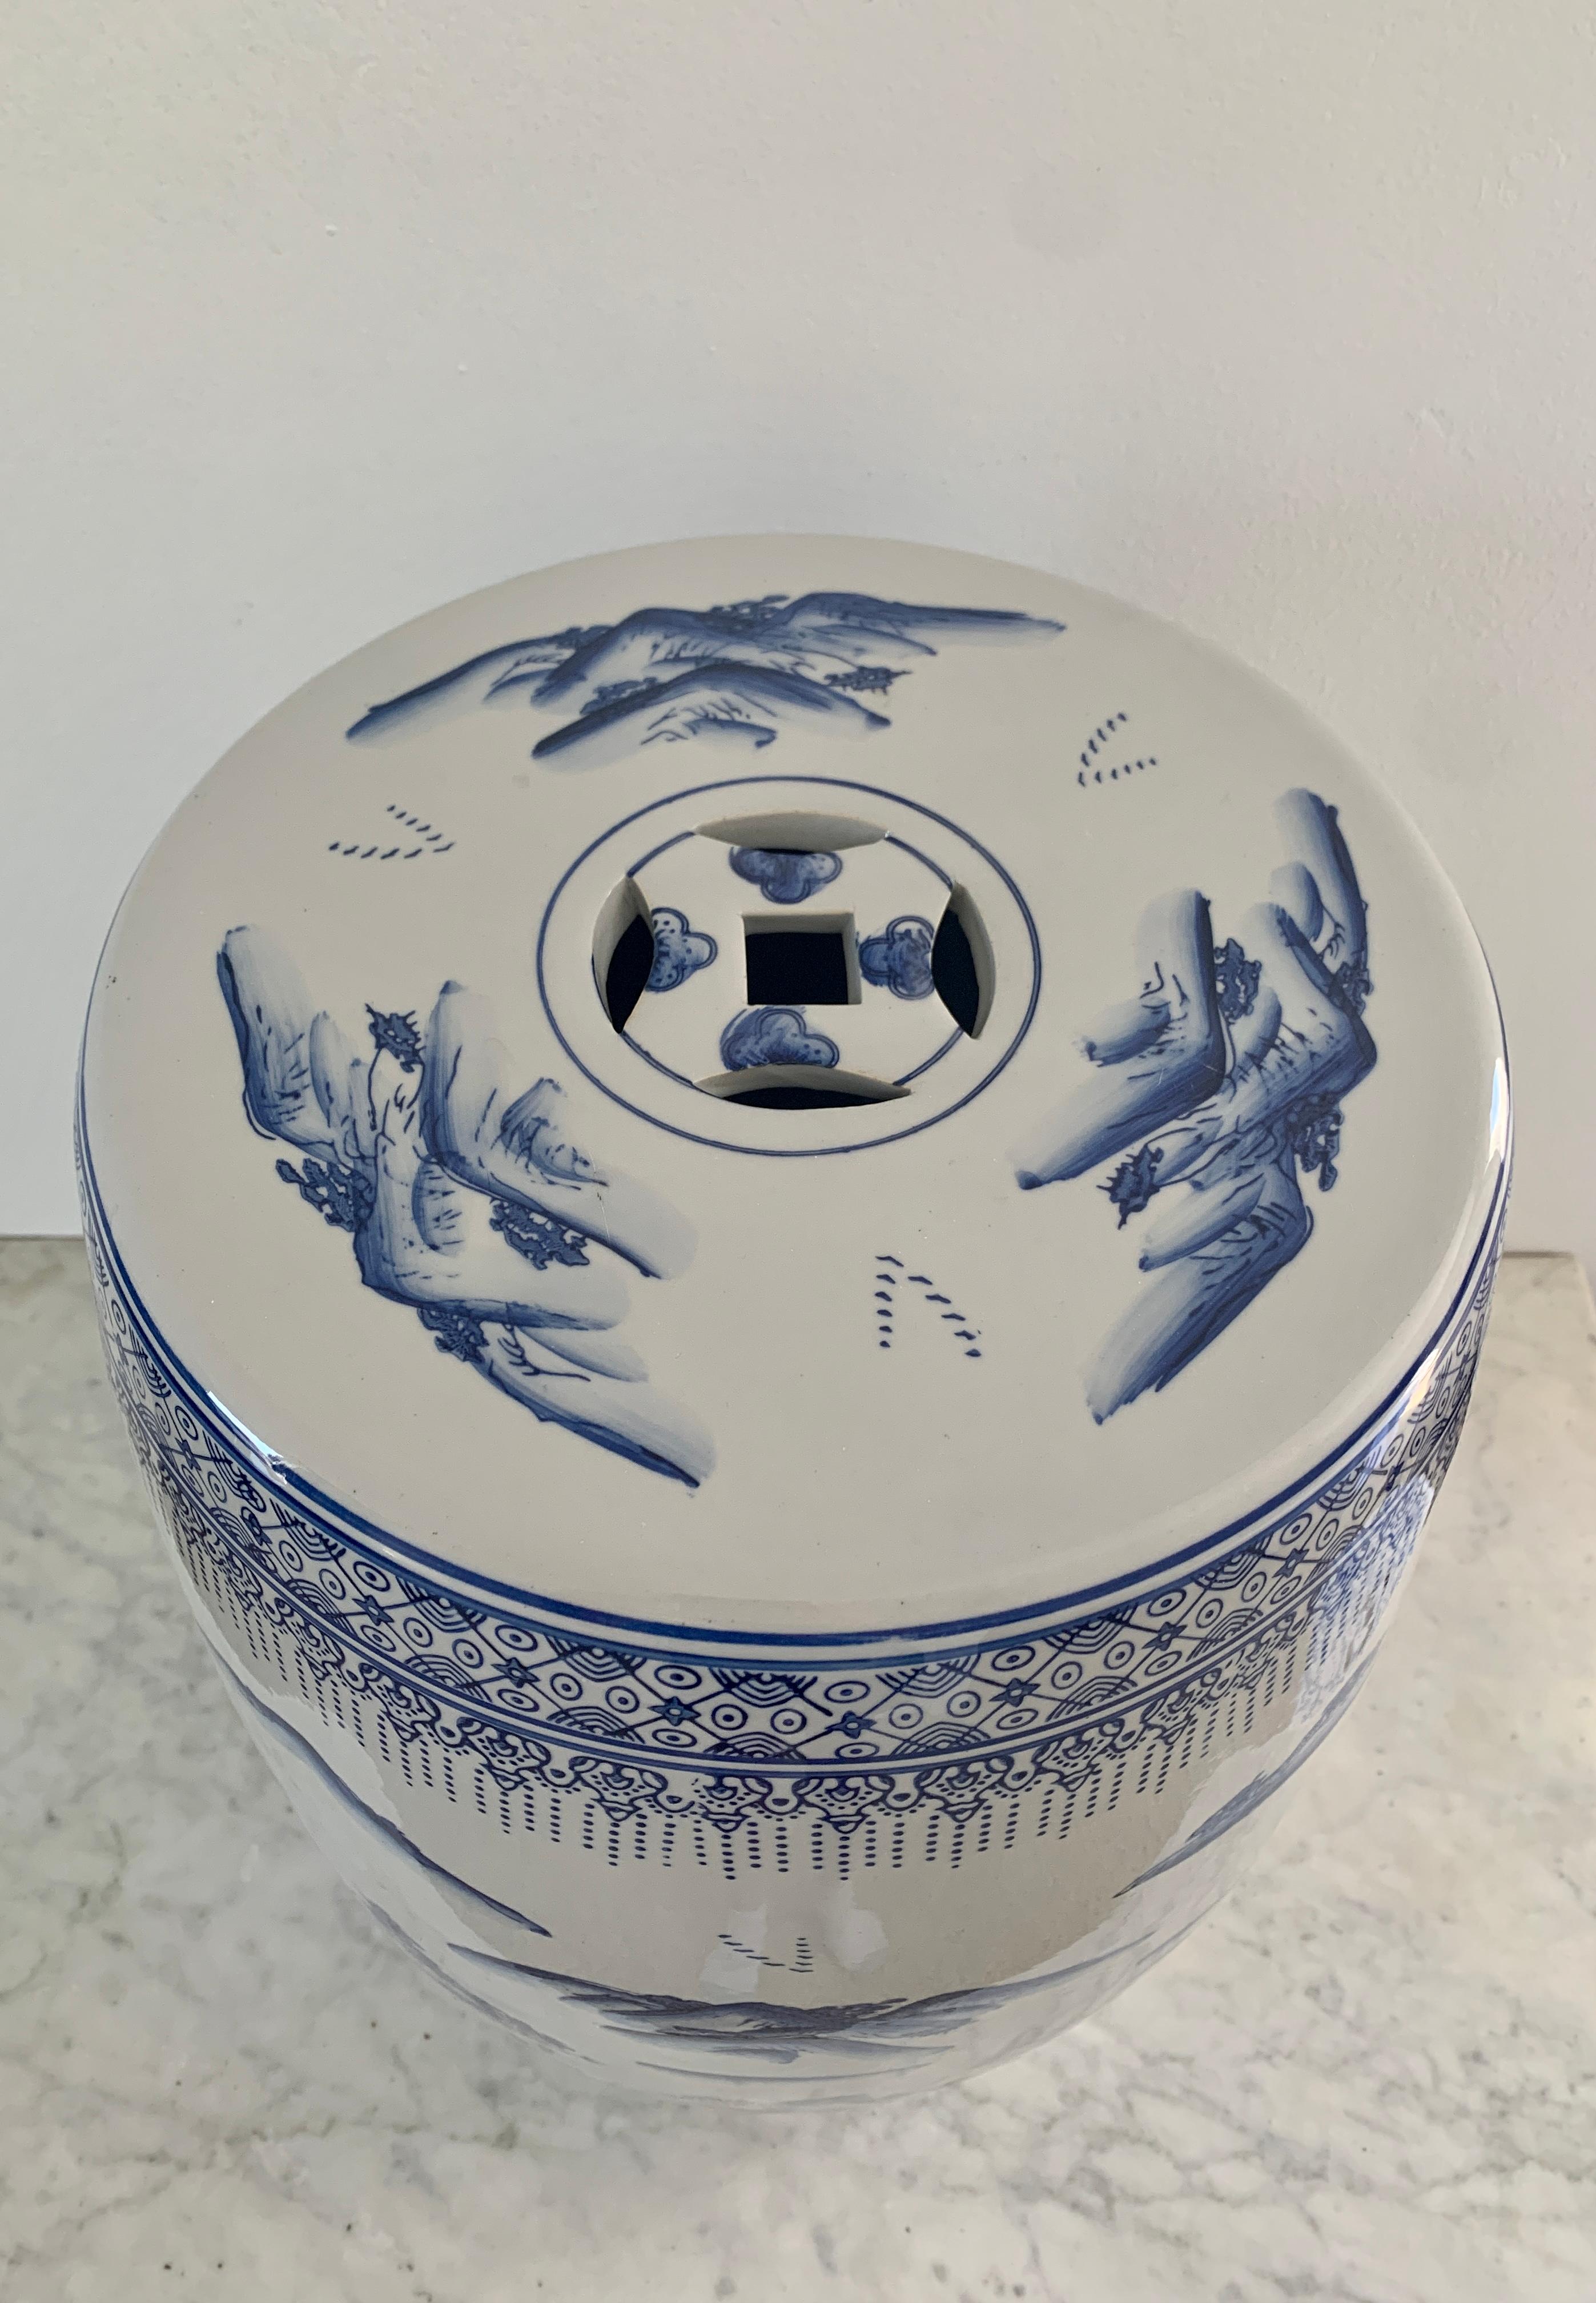 A gorgeous Chinoiserie blue and white porcelain garden stool, plant stand, or small side table featuring depictions of a scenic Asian landscapes and floral borders. 

China, Late 20th Century

Measures: 13